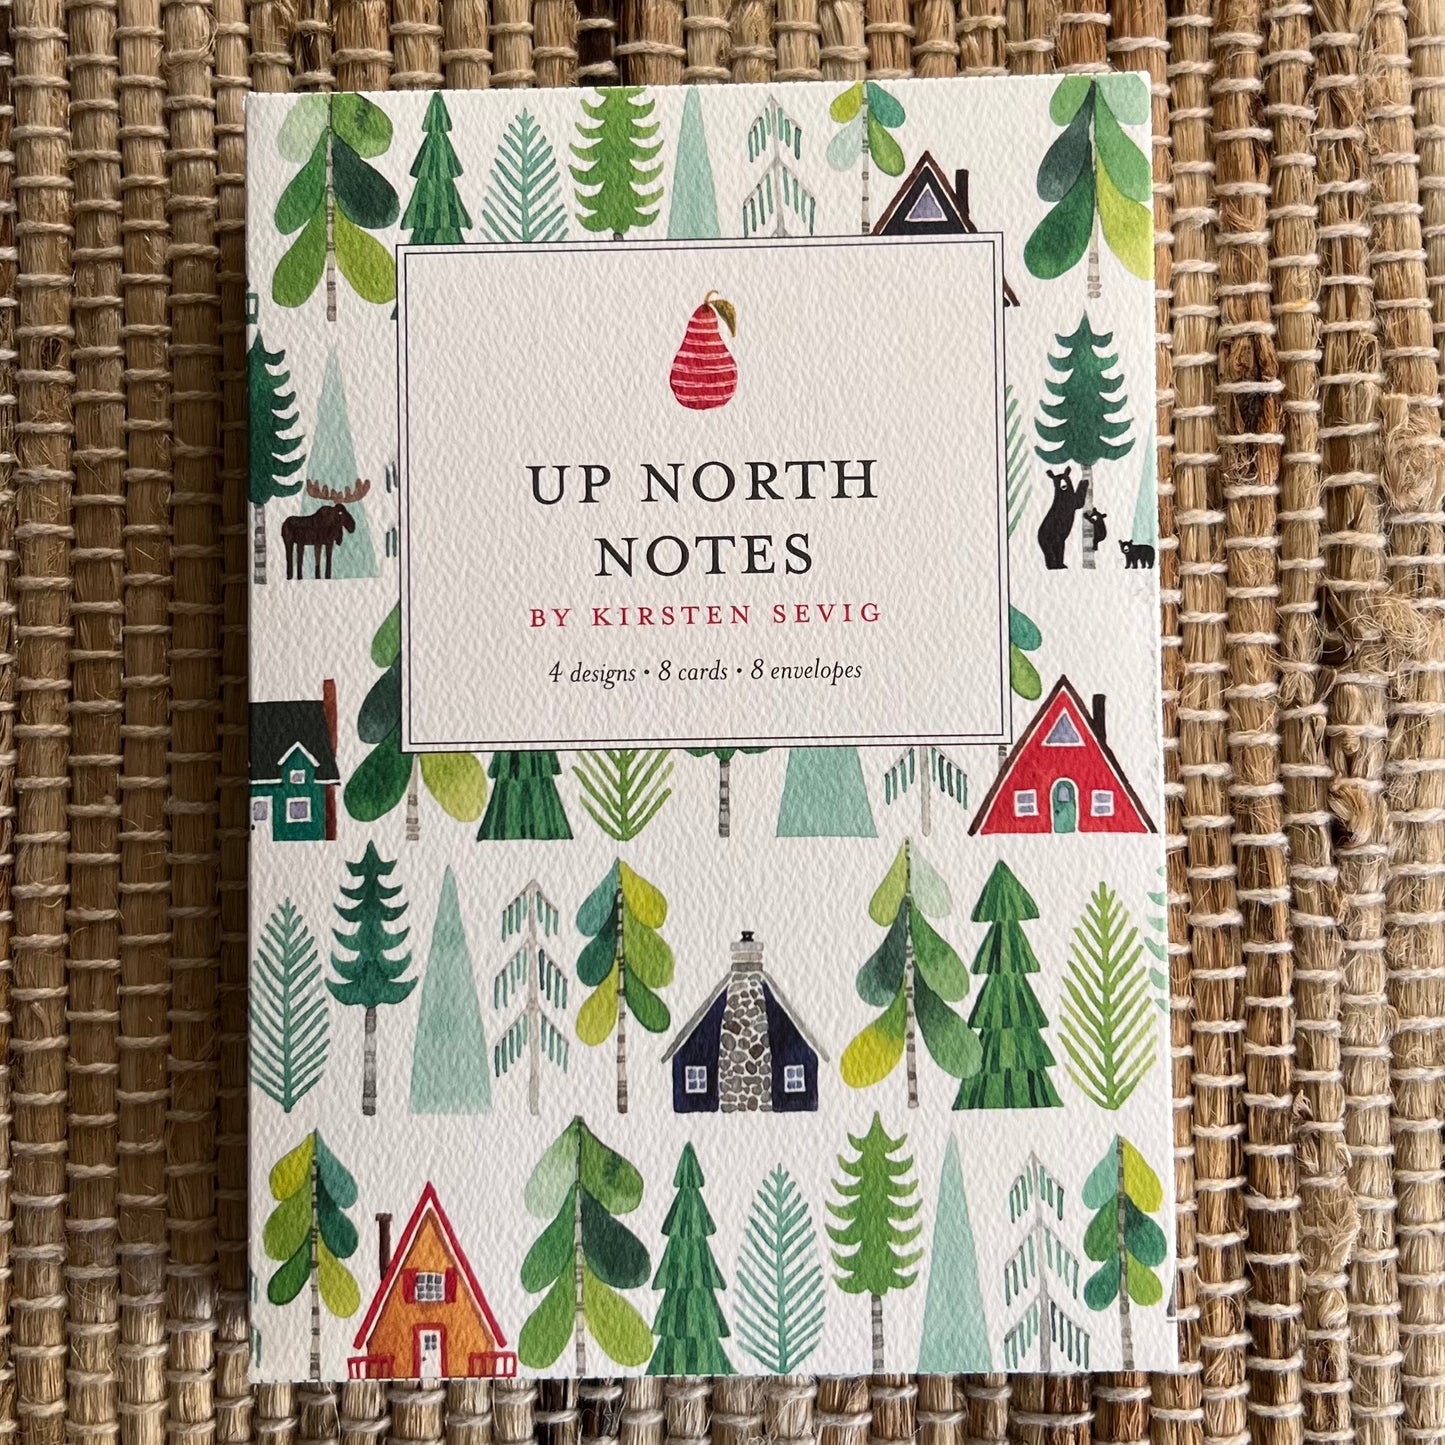 Up North Notes By Kristen Sevig